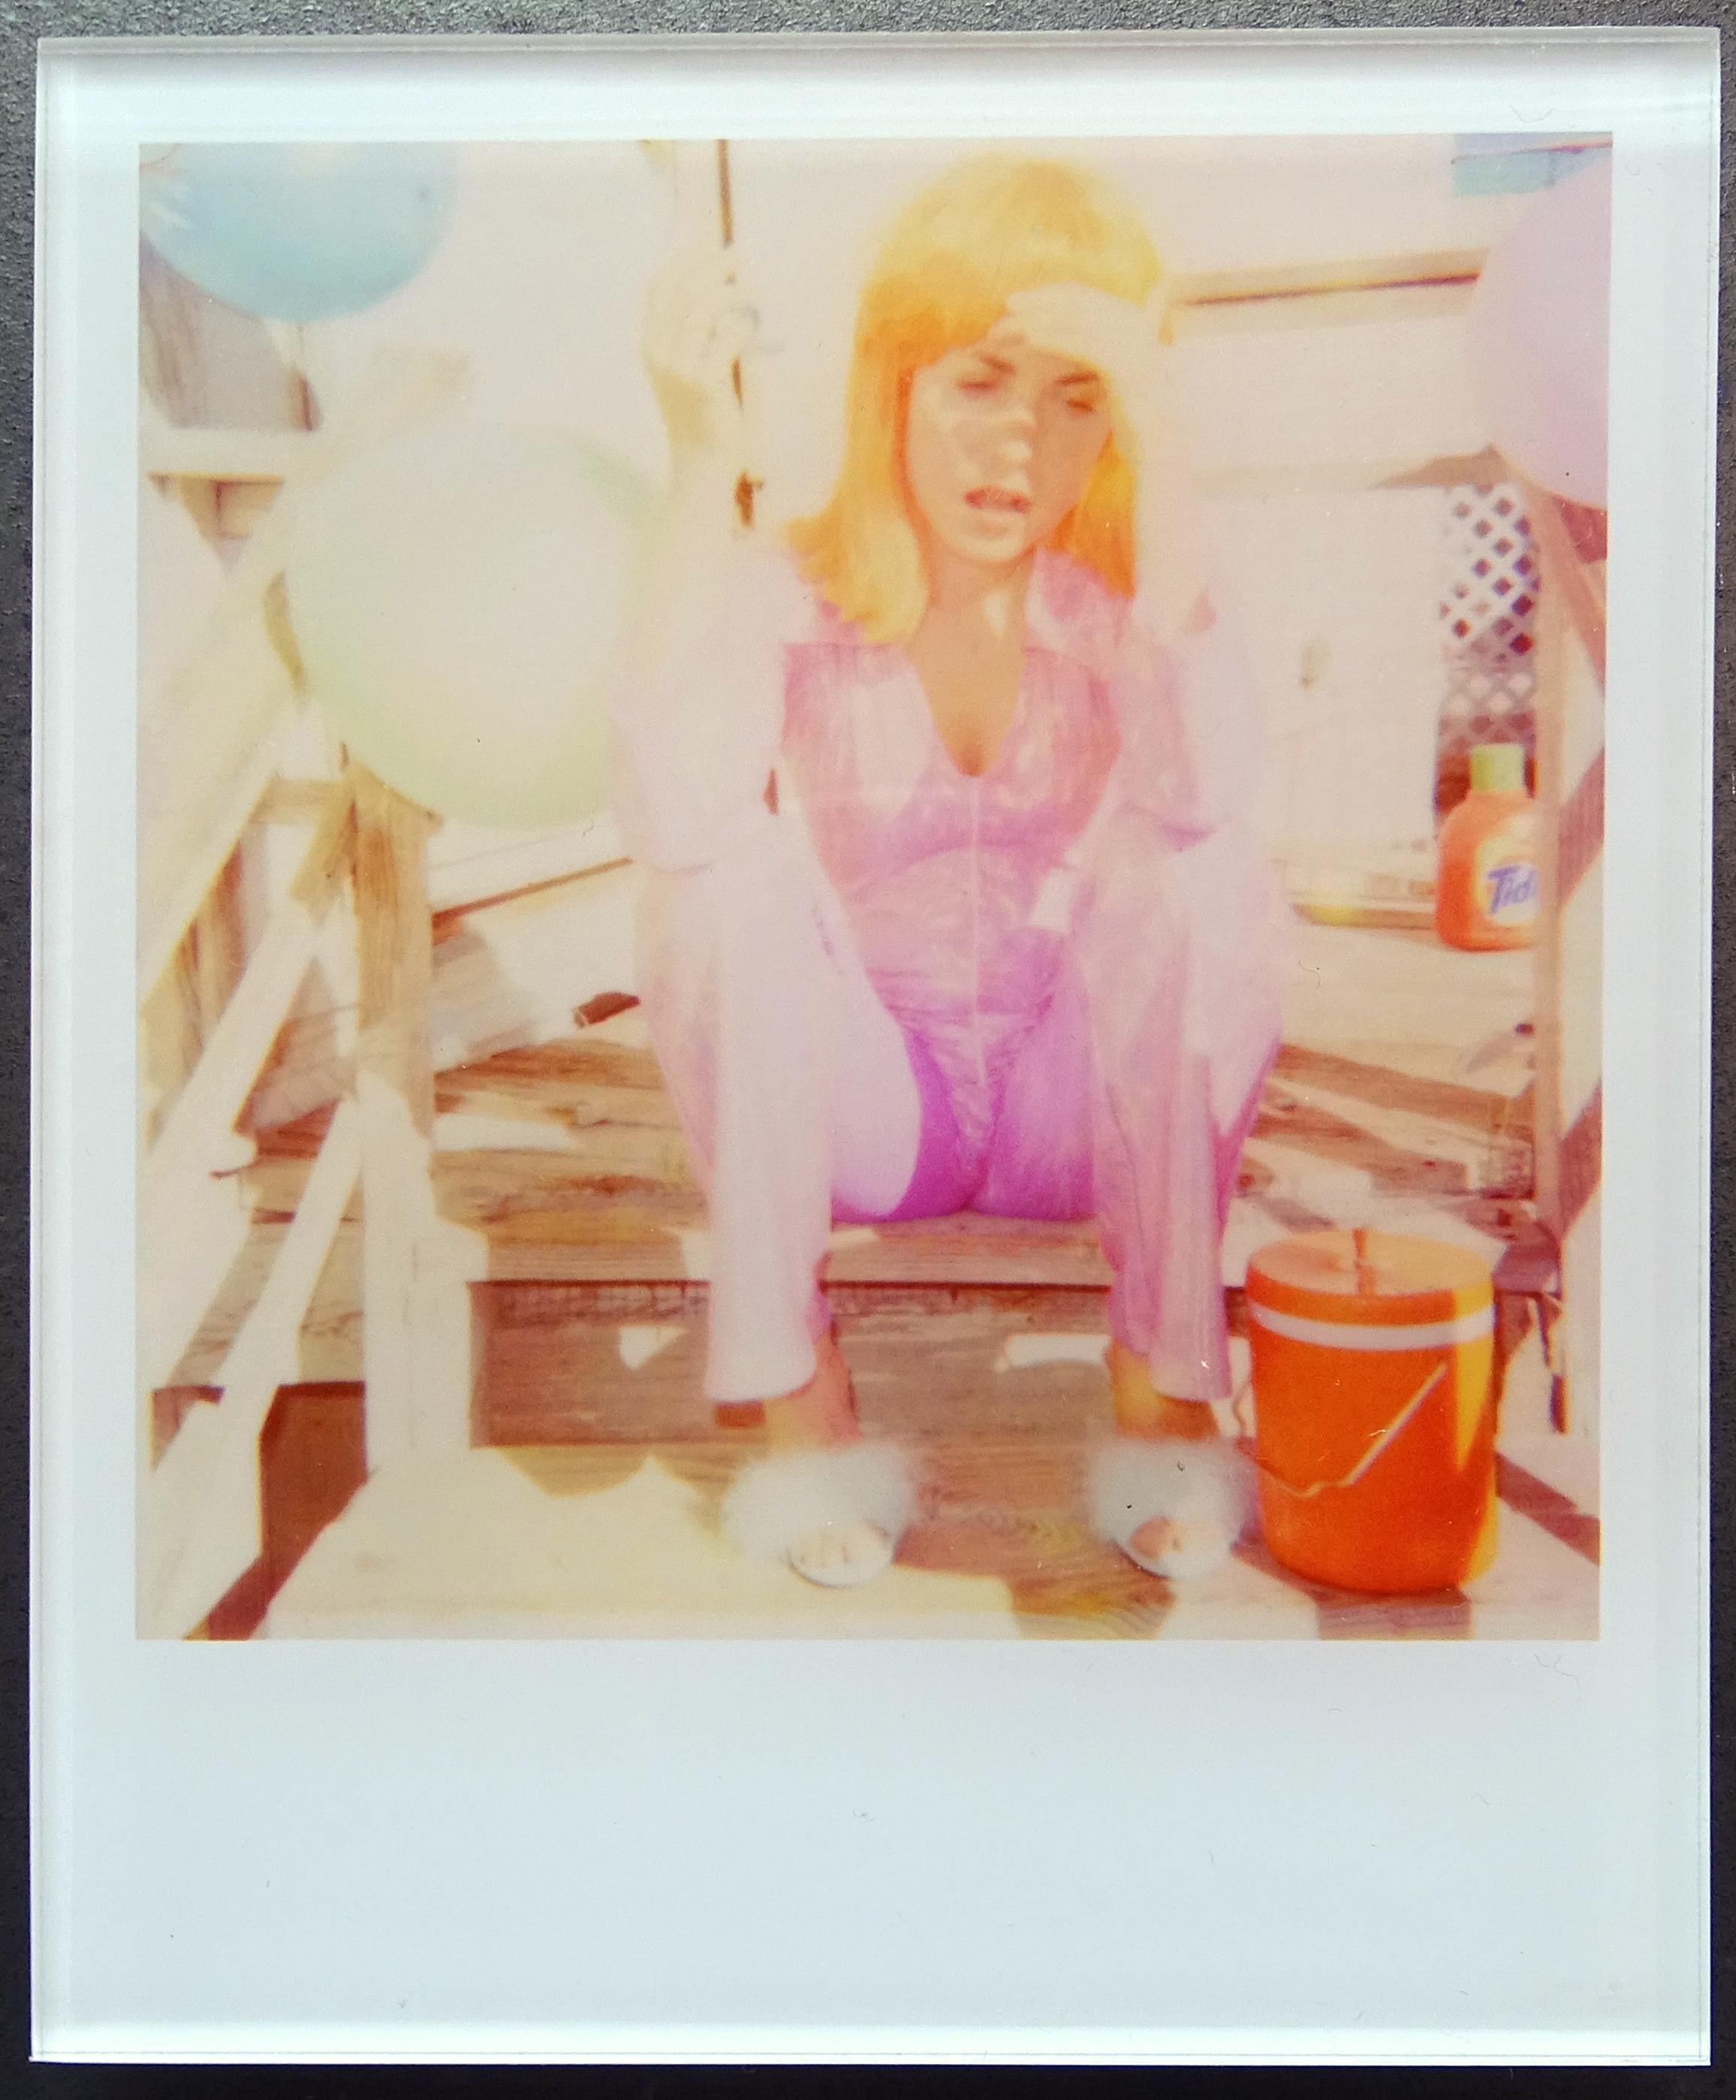 Stefanie Schneider's Minis
Party's over (Oxana's 30th Birthday), 2008
featuring Radha Mitchell

Signed and signature brand on verso.
Lambda digital Color Photographs based on a Polaroid.
Sandwiched in between Plexiglass (thickness 0.7cm)

Polaroid